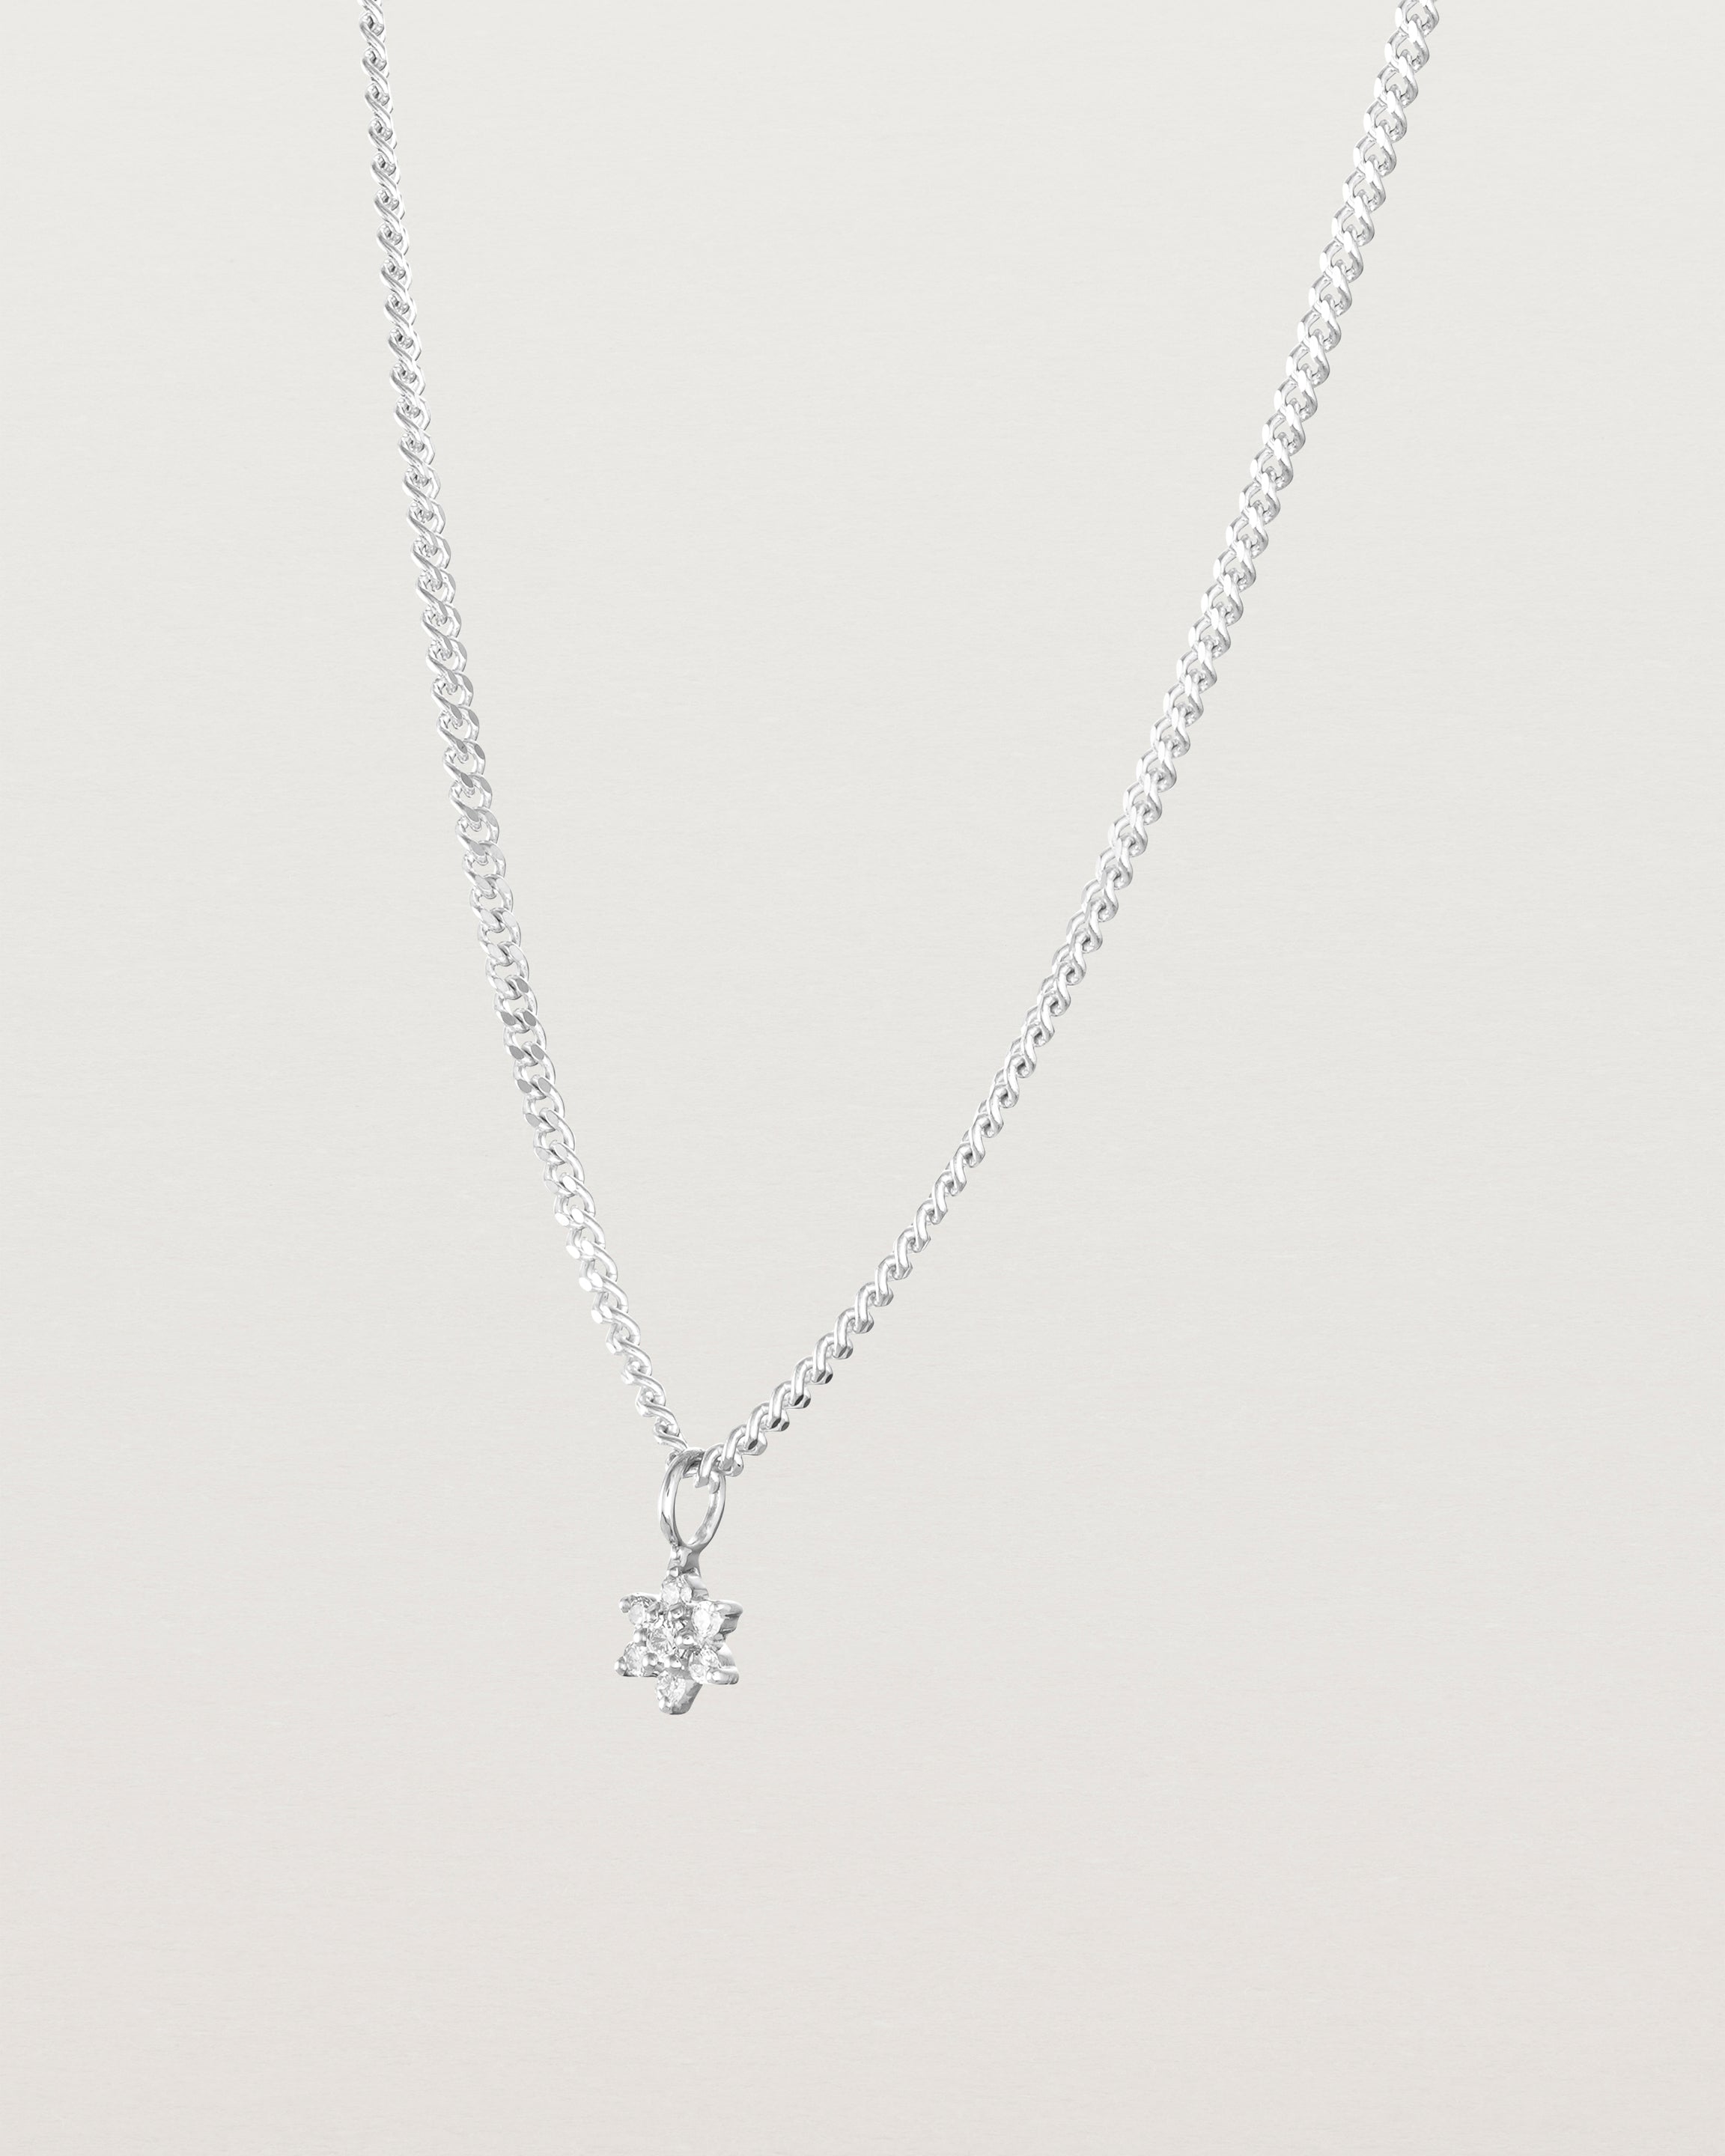 Side image of the Petit Starburst Necklace in White Gold